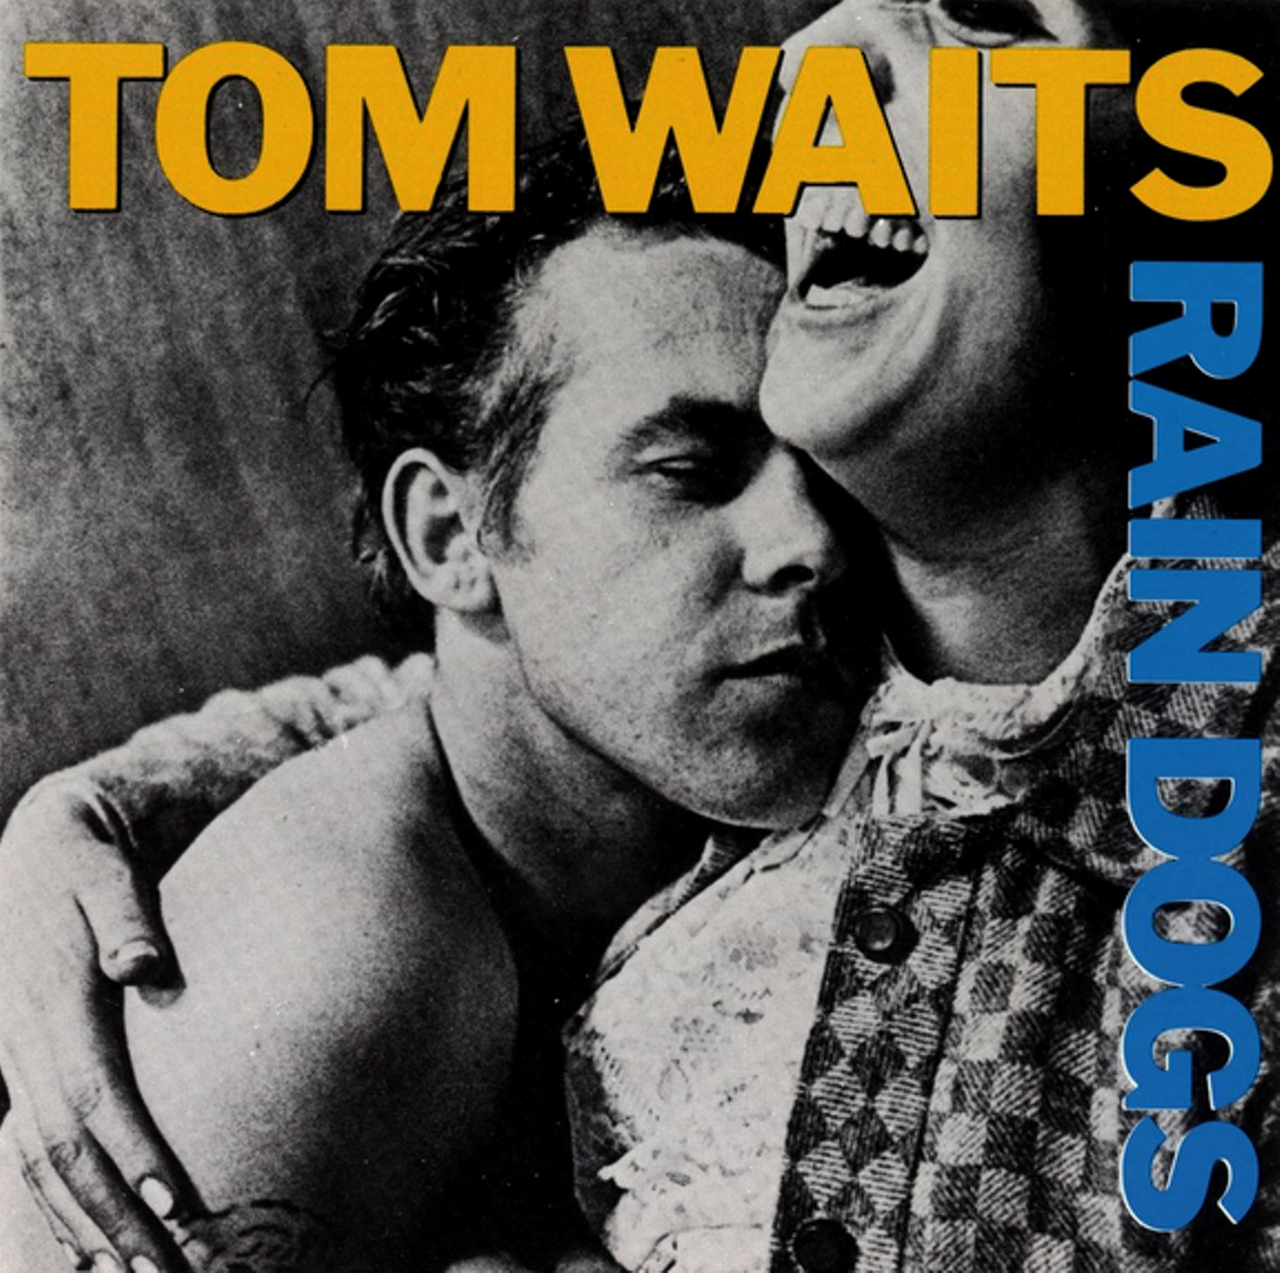 "Clap Hands" by Tom Waits
A Cincinnati jacket and a sad luck dame
Hanging out the window with a bottle full of rain